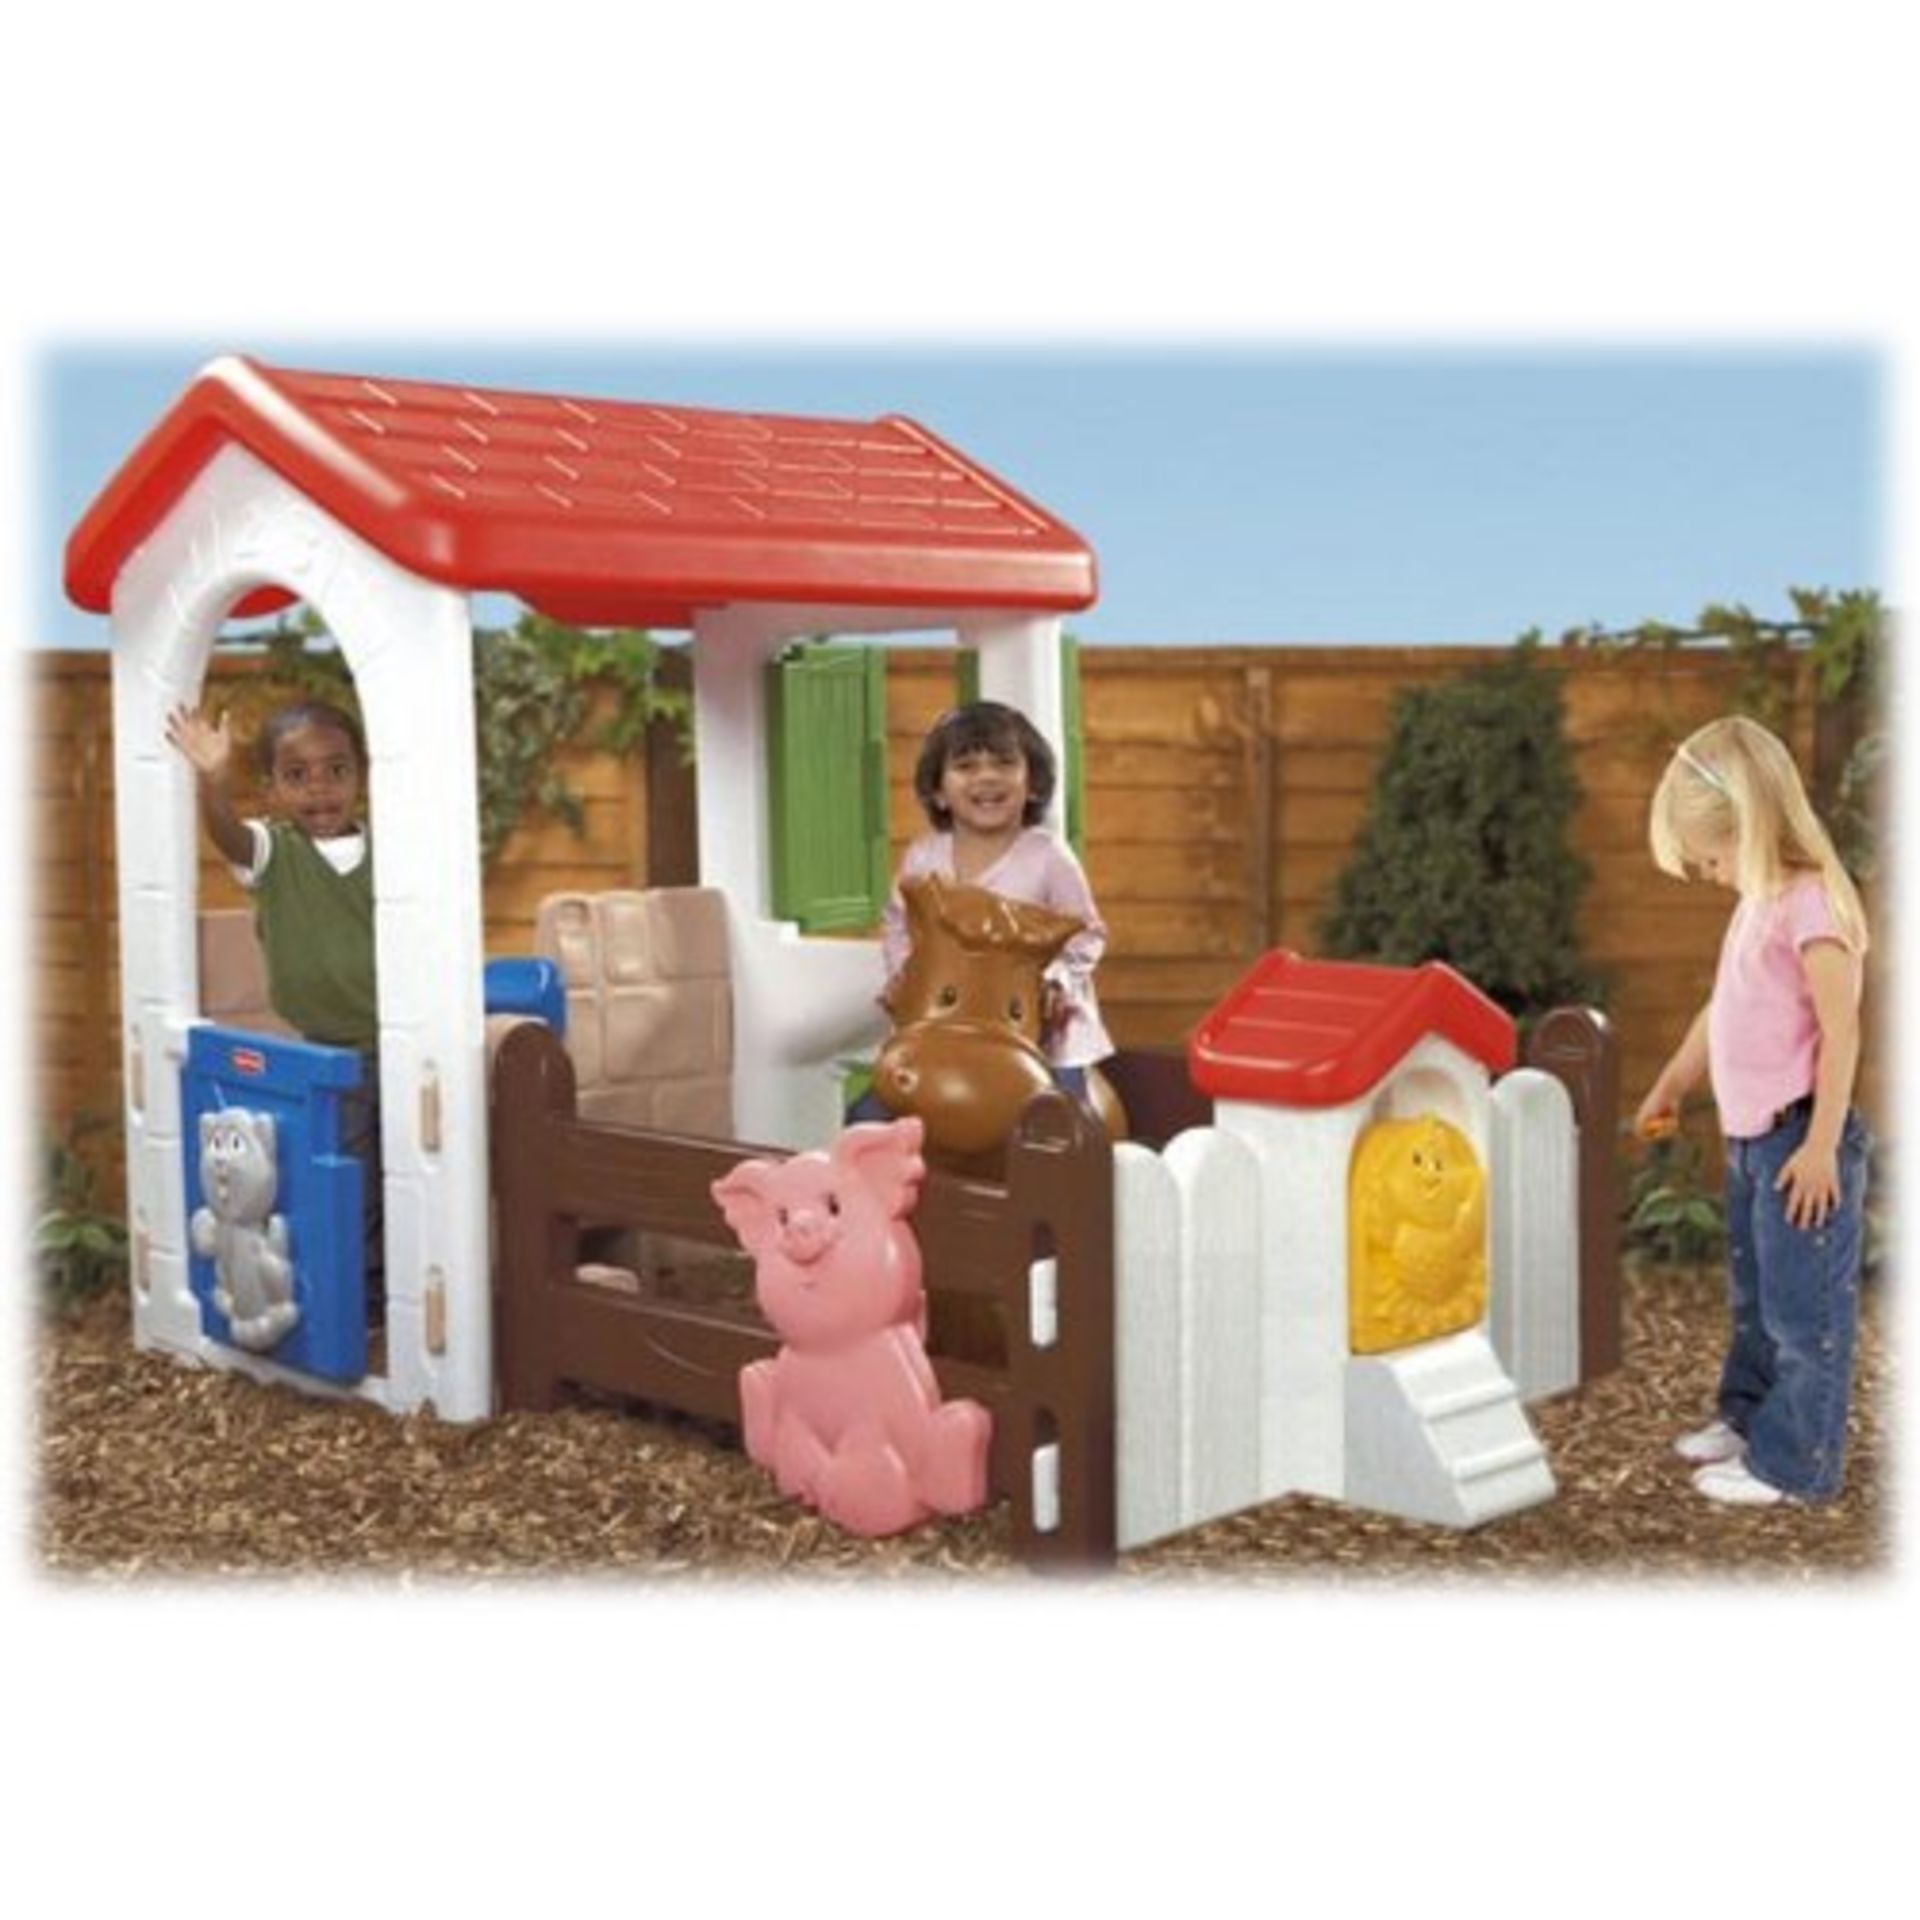 New and boxed rrp £349.99 Fisher Price Extra large outdoor Farm playset comes in 3 cartons - Image 6 of 6